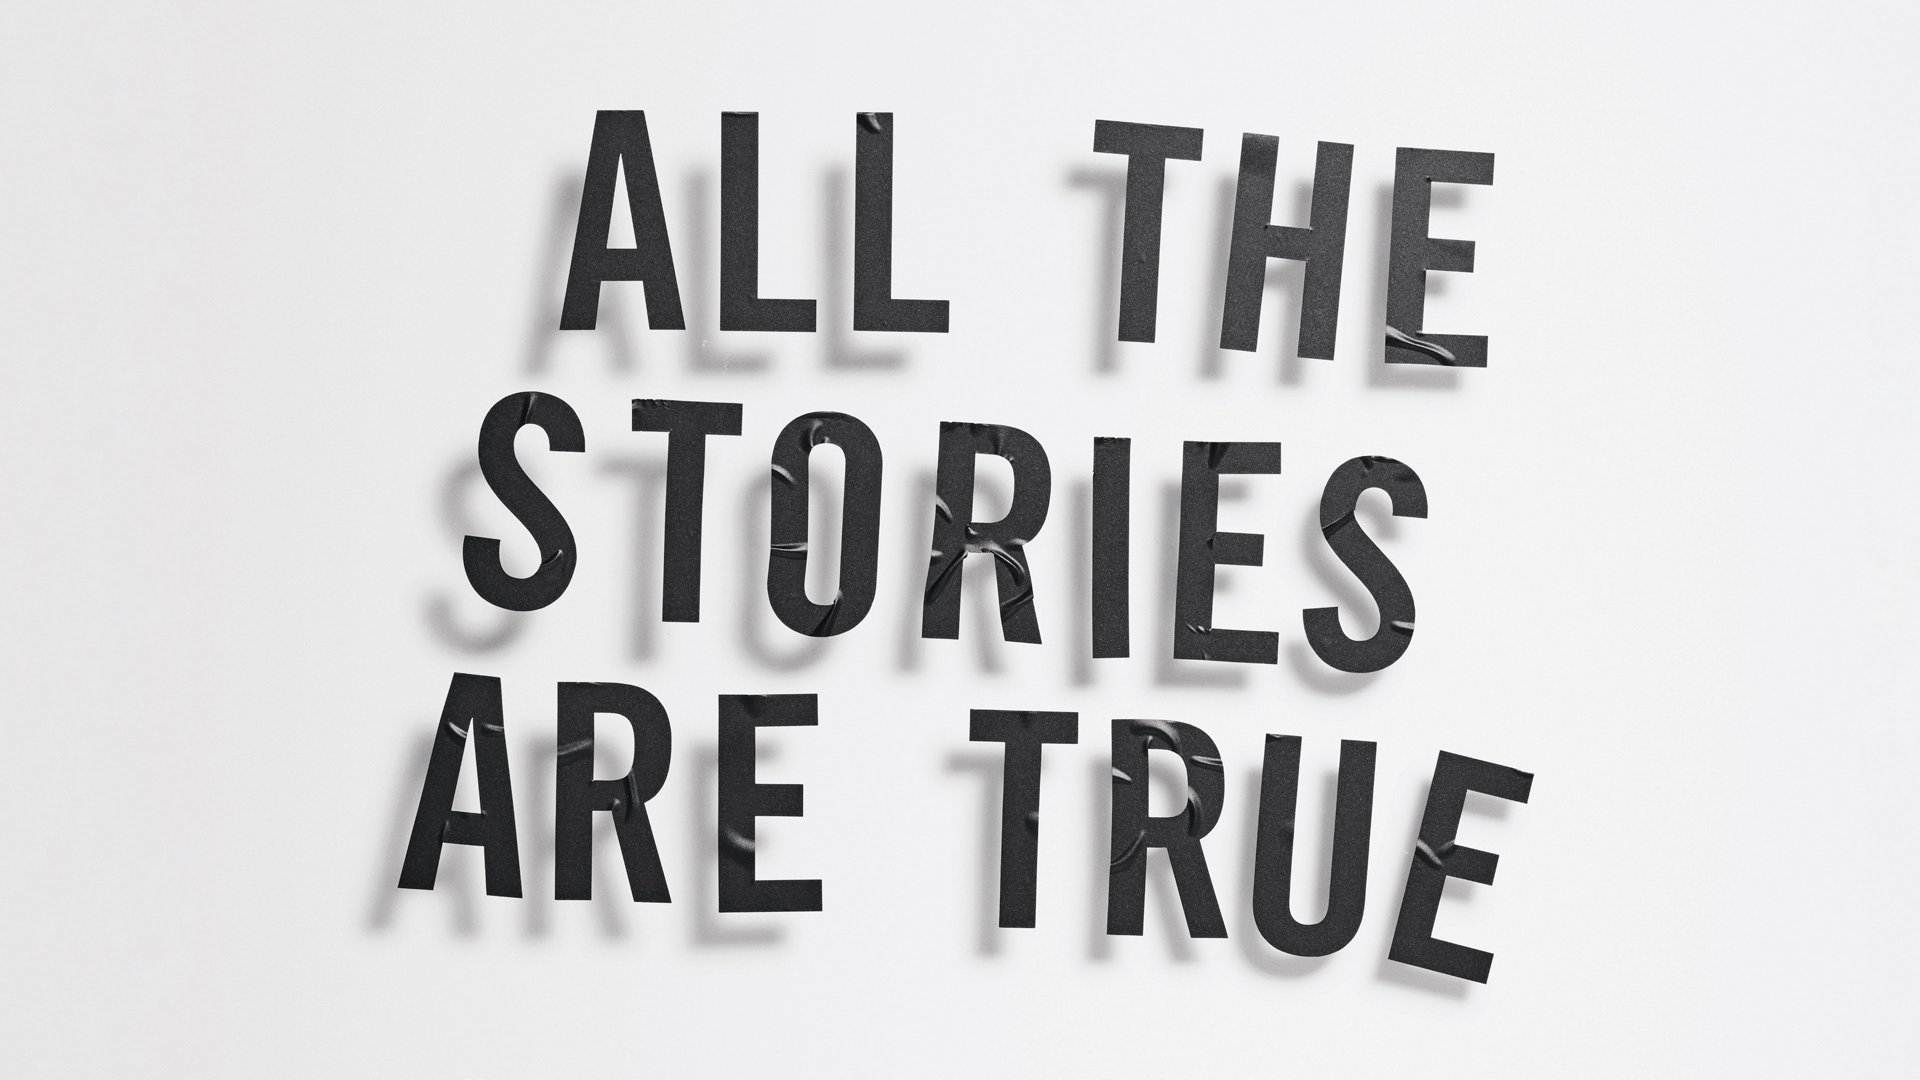 converse all the stories are true campaign